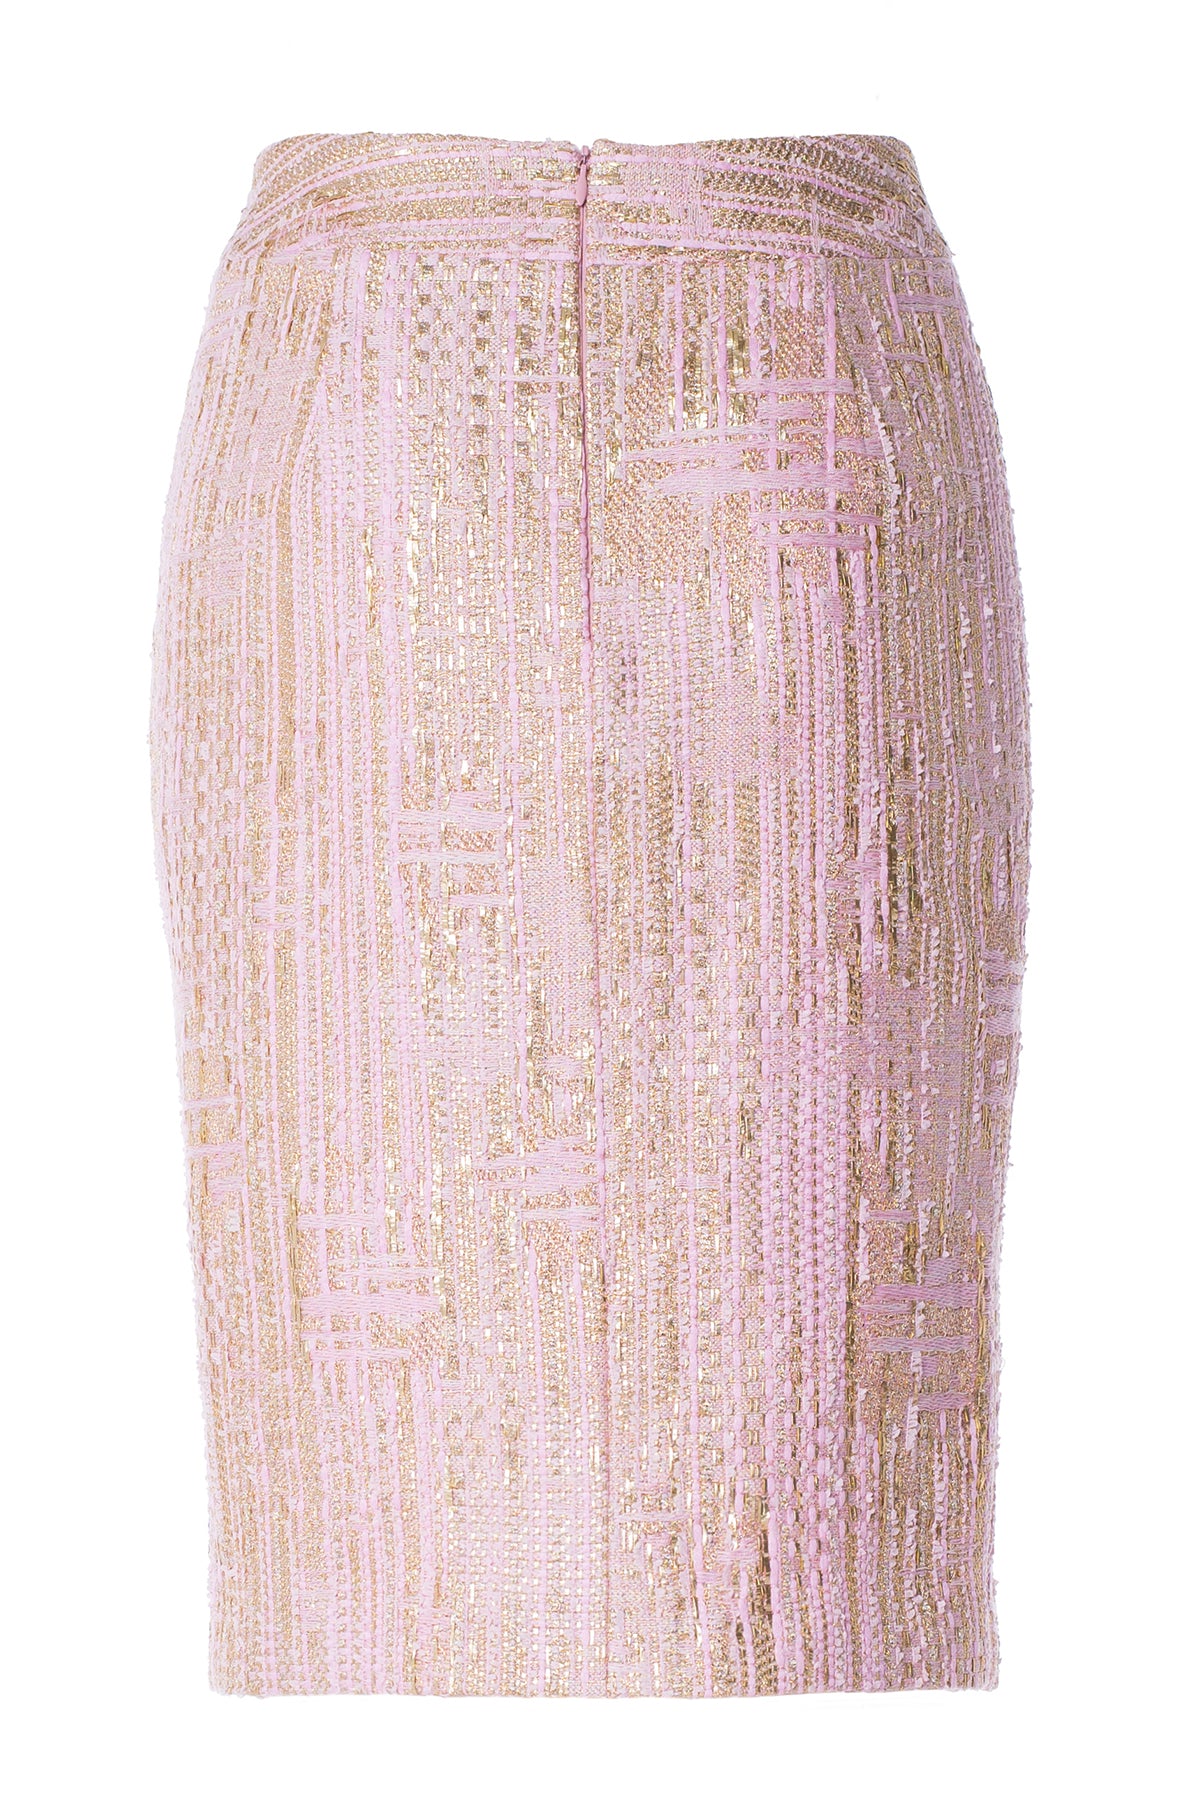 PINK AND GOLD TWEED SKIRT